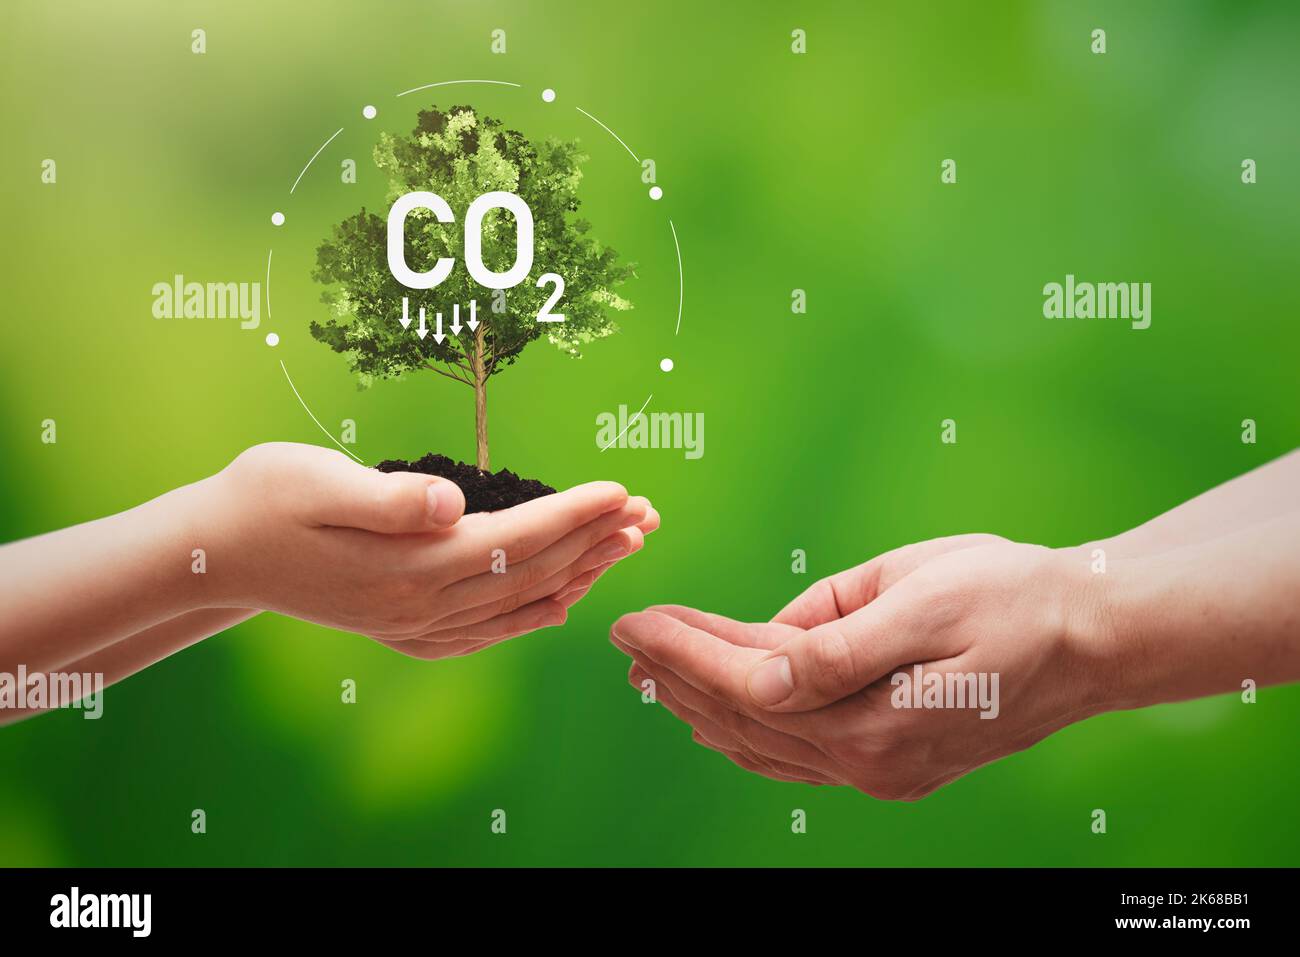 Carbon footprint, sustainable energy sources concept with tree on hand Stock Photo